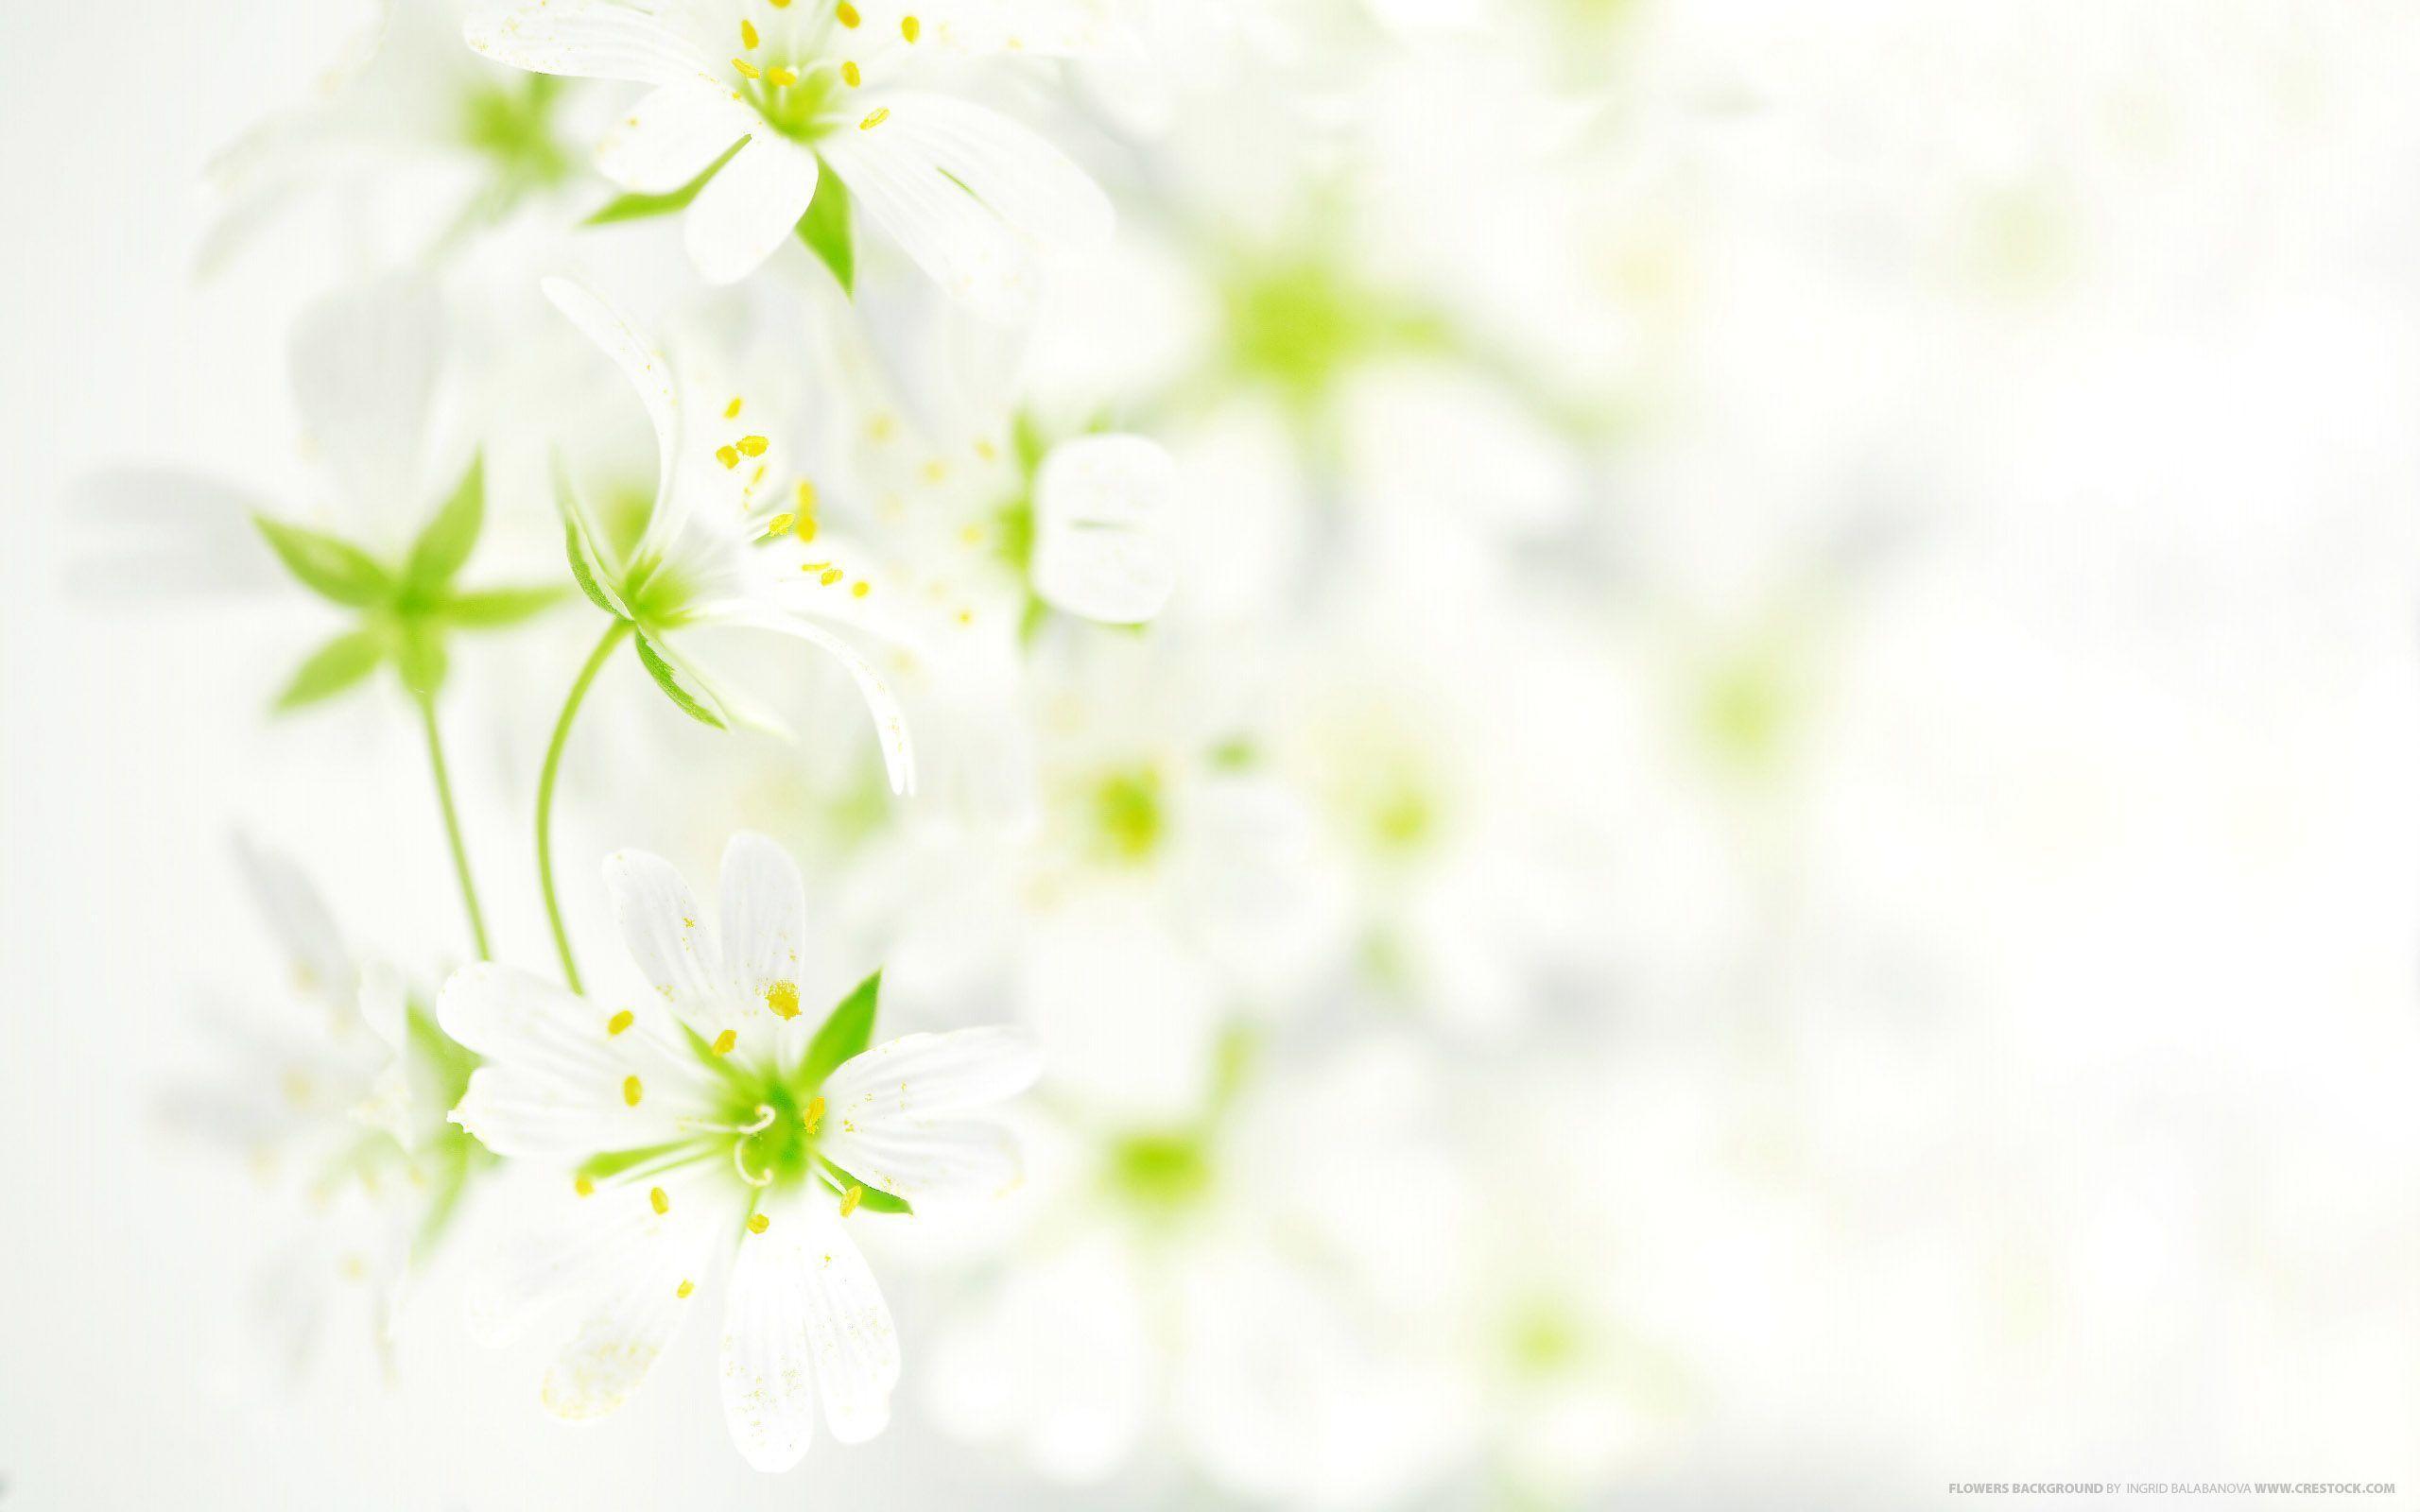 Flowers Background 94 340165 High Definition Wallpaper. wallalay.com